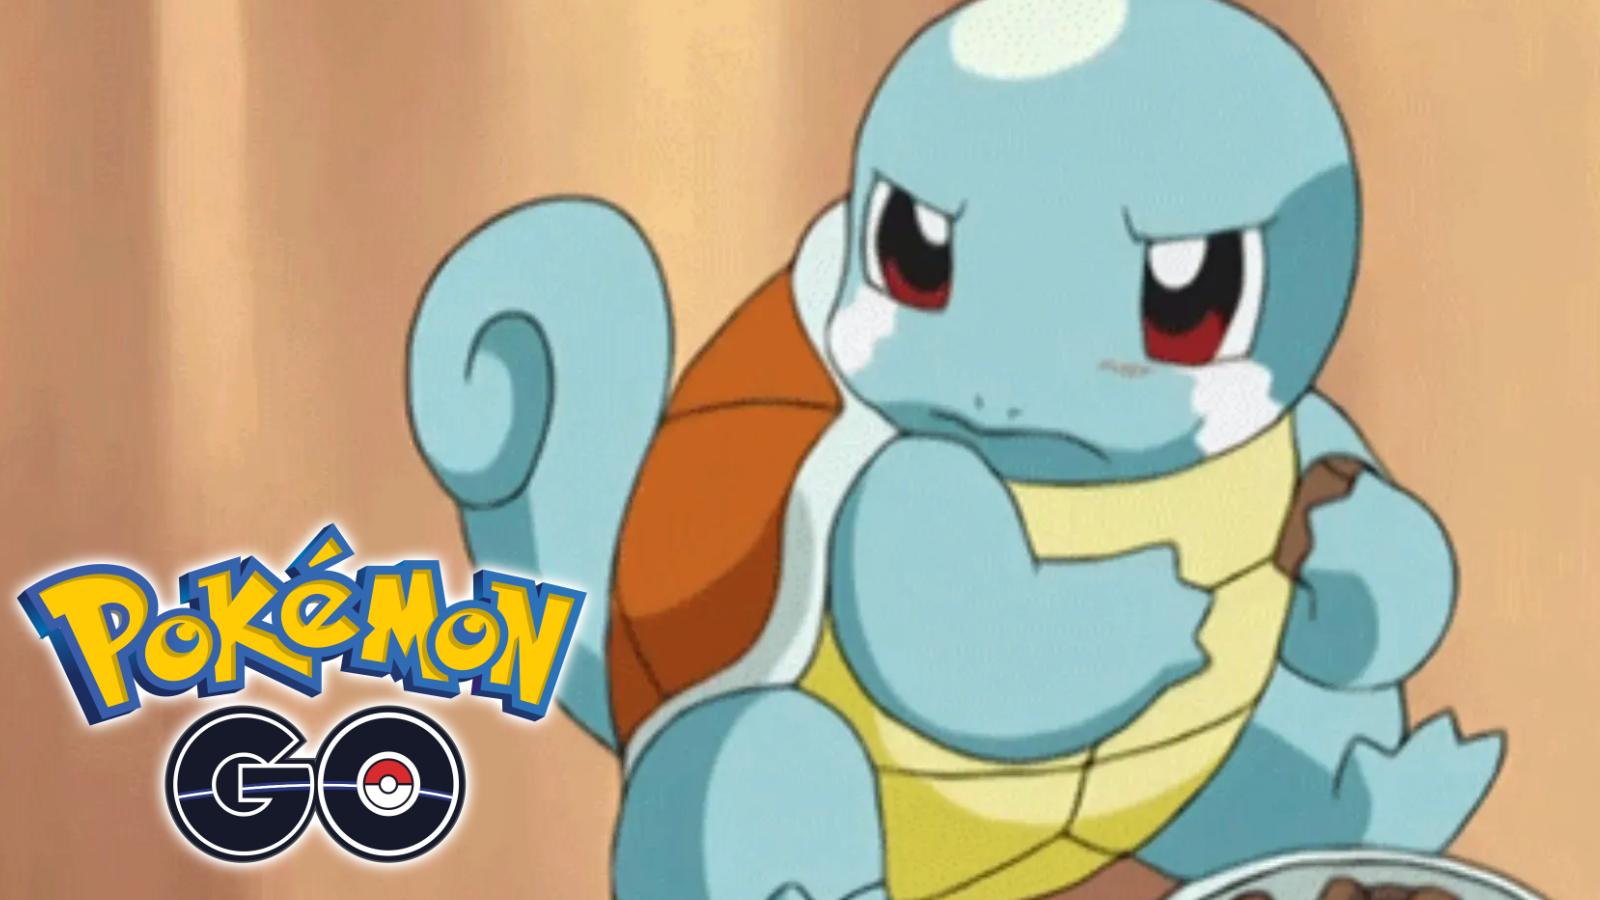 Squirtle looking at Pokemon Go logo